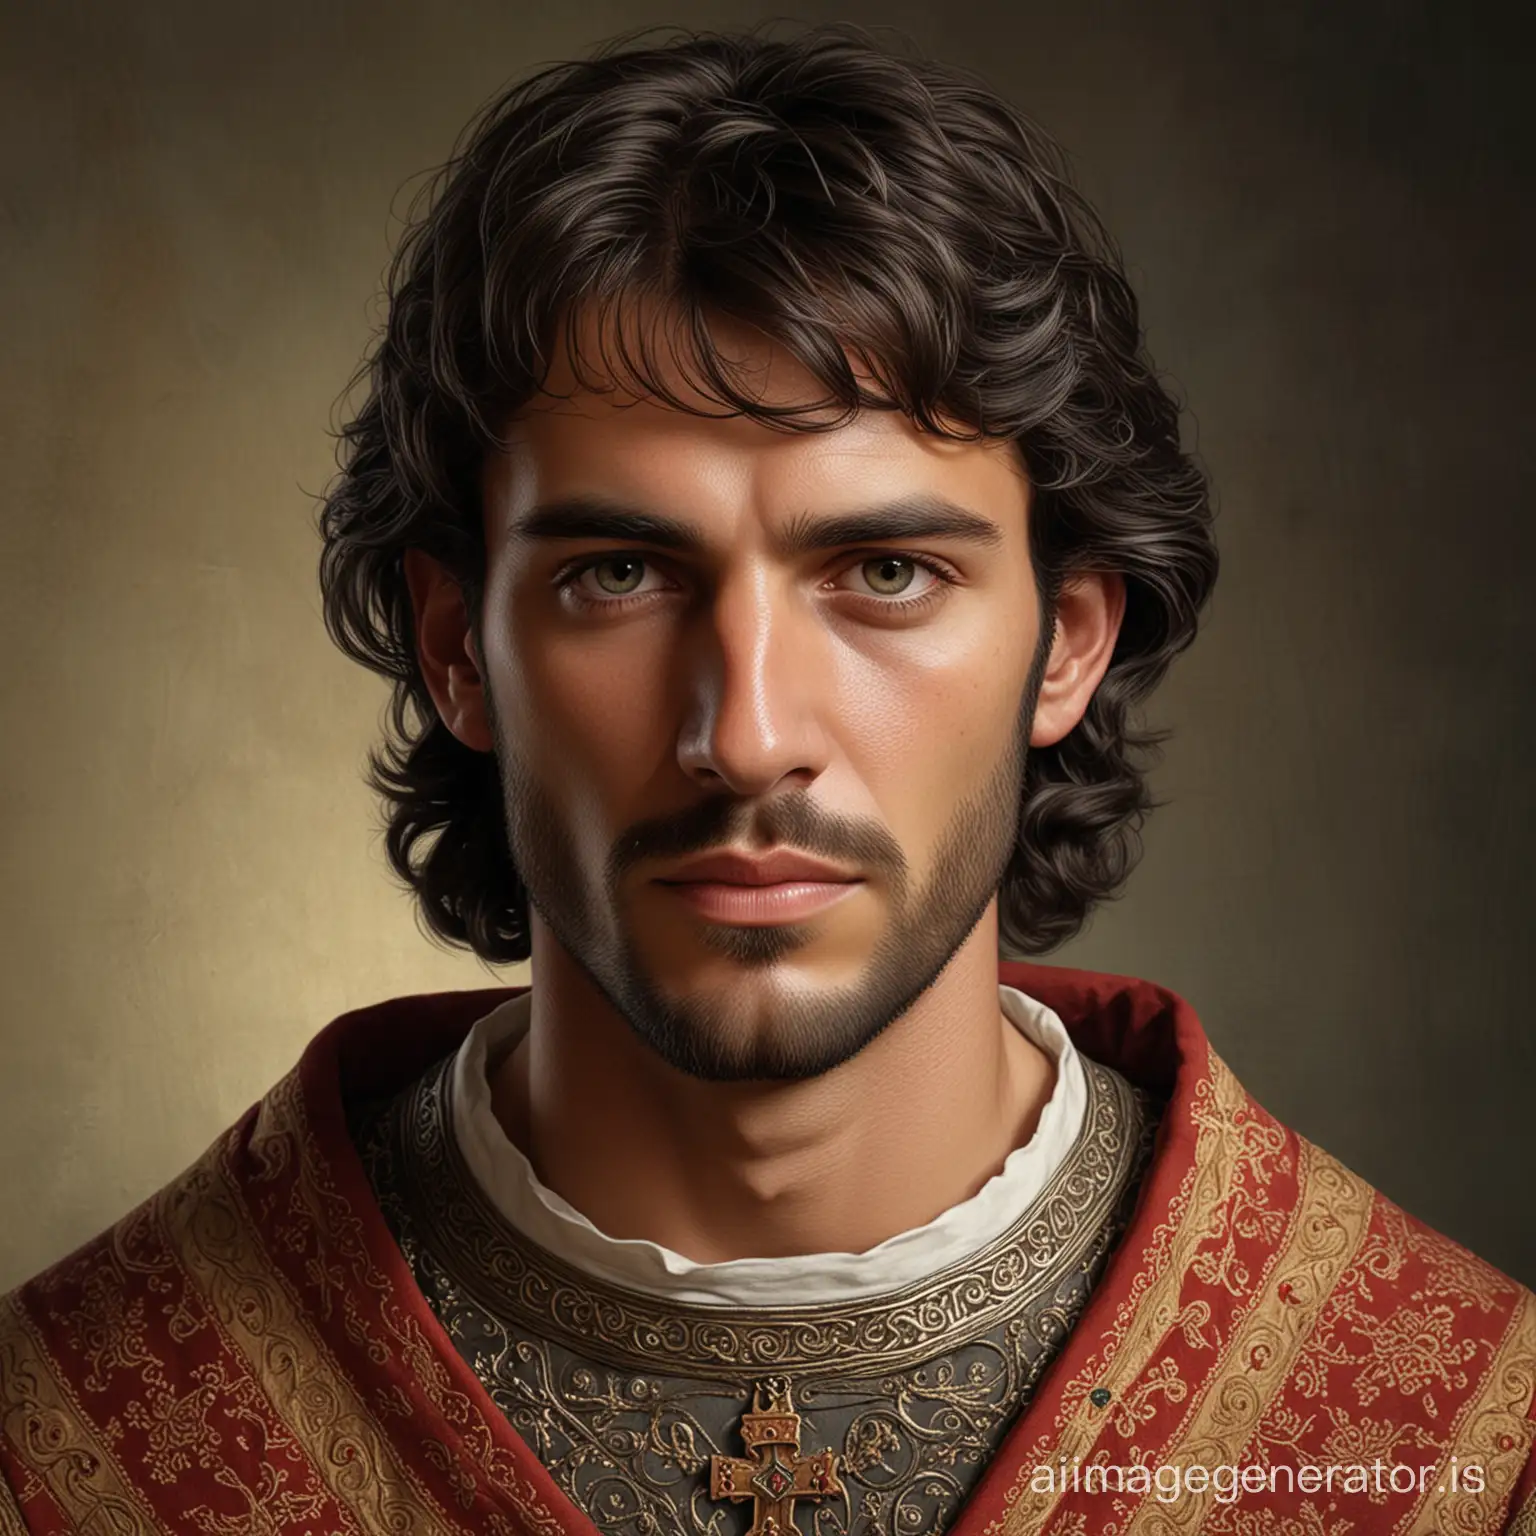 An ultra realistic portrait of a Christian noble Spanish man of the 11th century